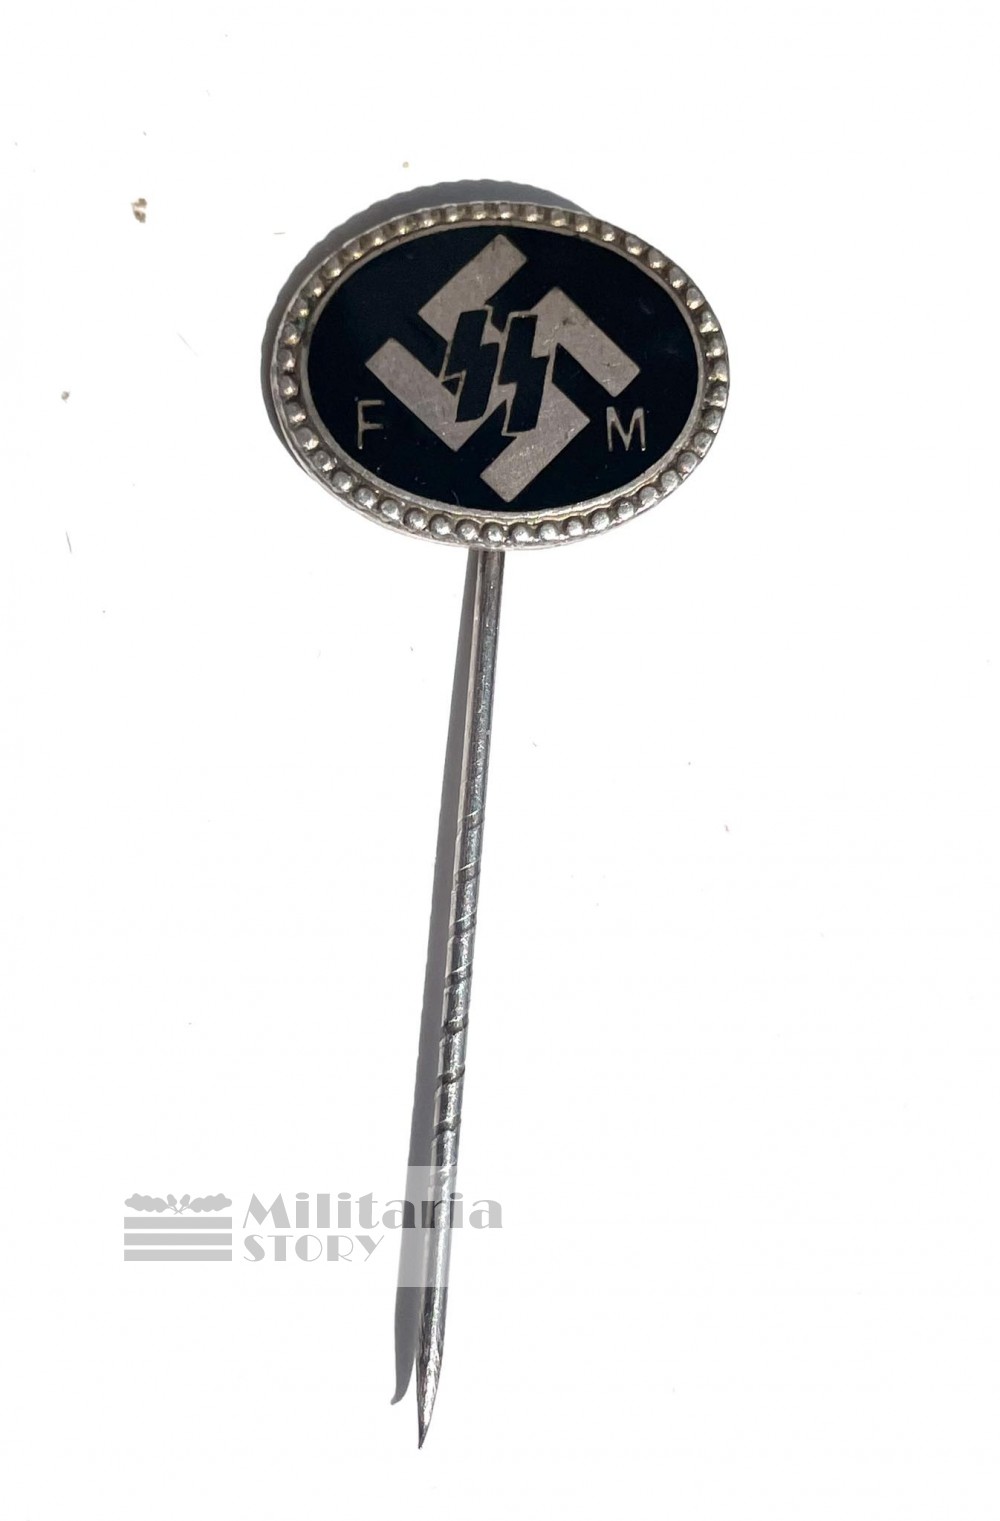 SS-FM Förderndes Mitglied members pin - SS-FM Förderndes Mitglied members pin: Third Reich Medals and badges